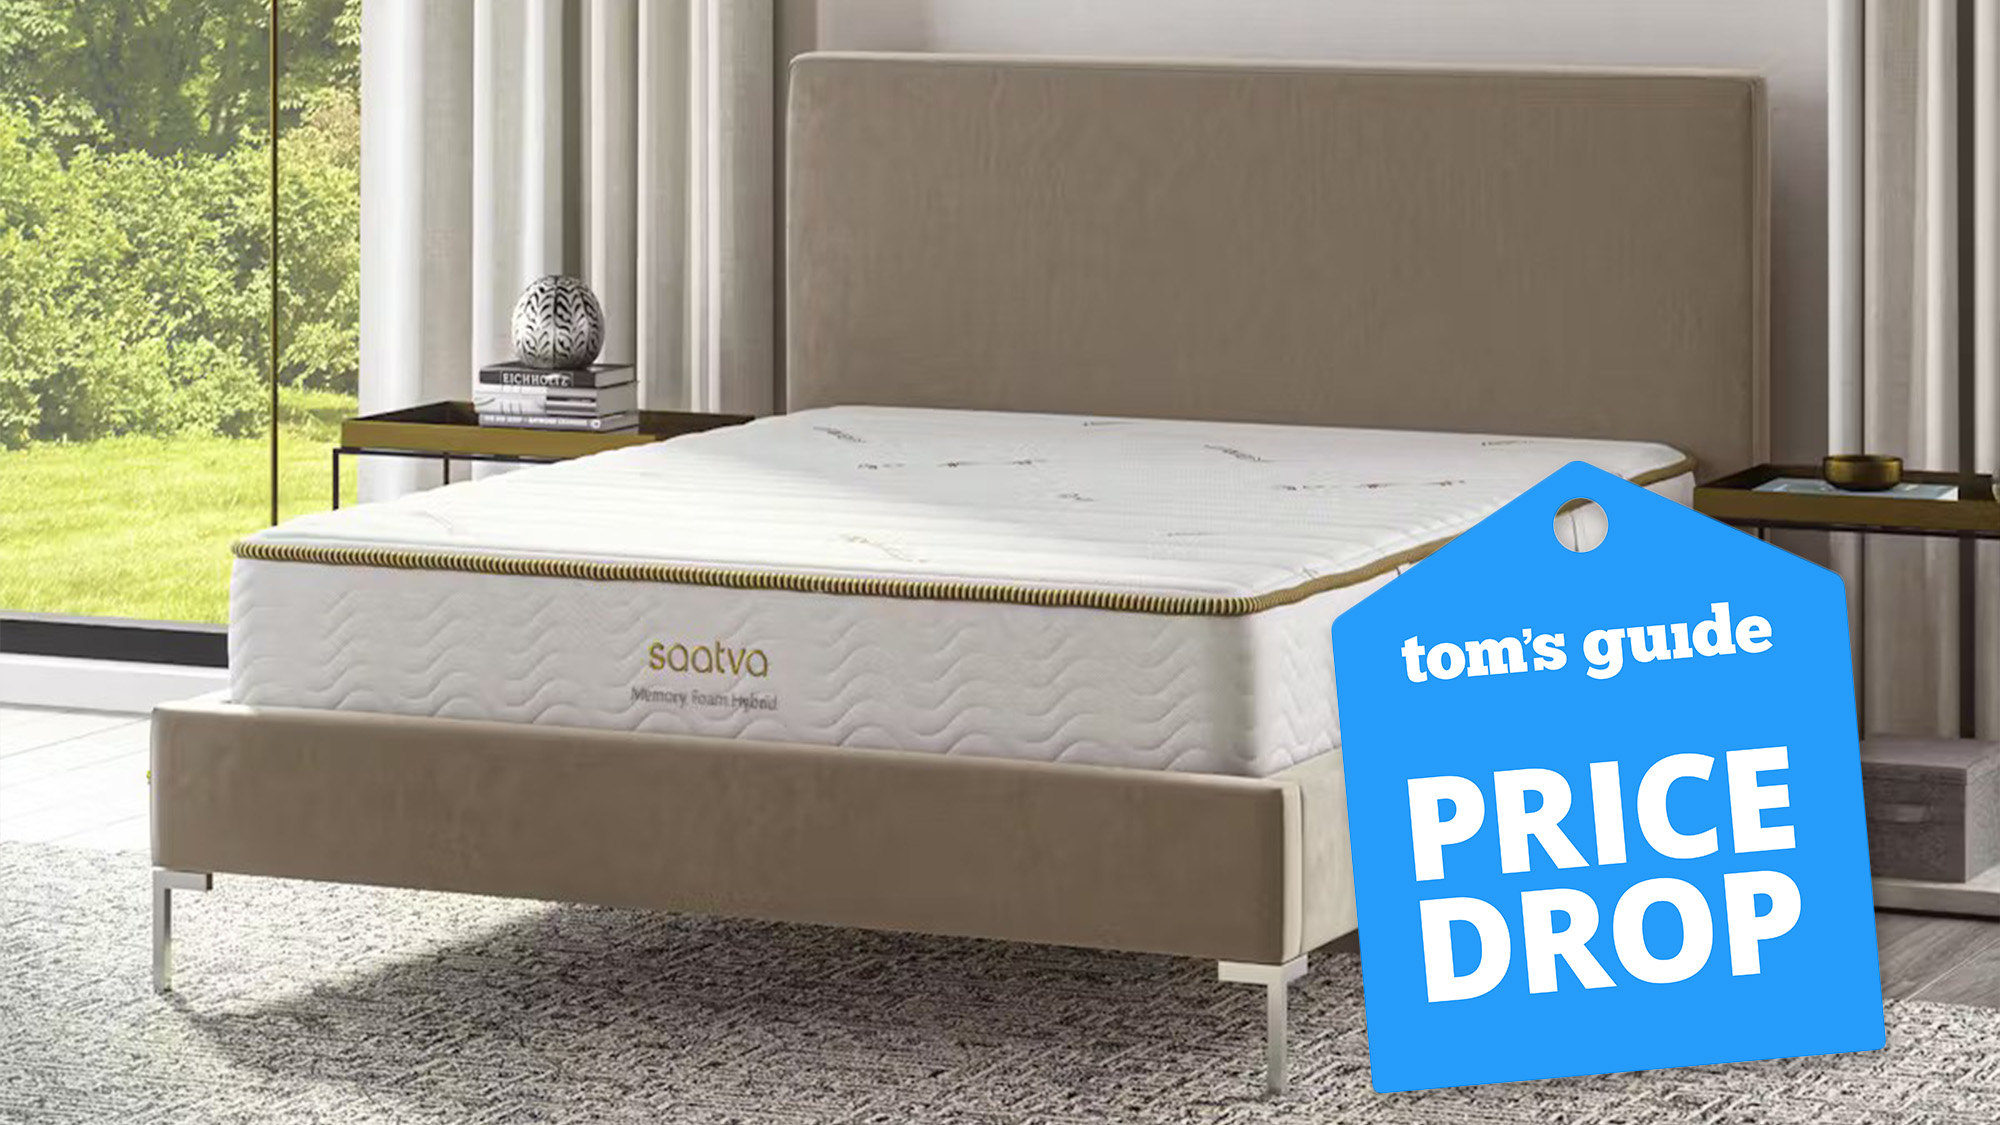 Saatva’s most affordable mattress drops to $795 in Memorial Day sales — why I’d buy it